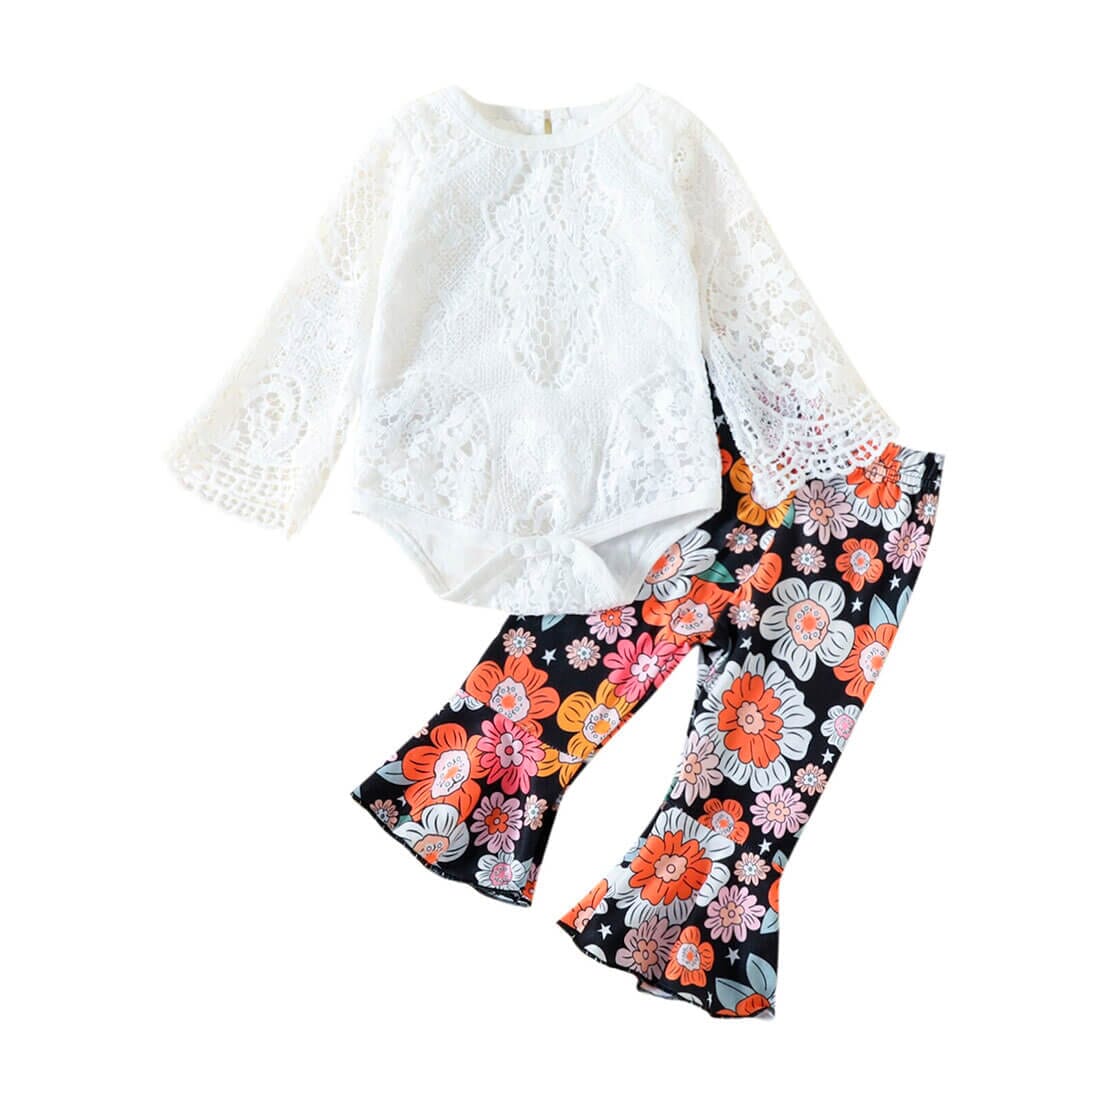 Lace Floral Bell Bottom Pants Baby Set